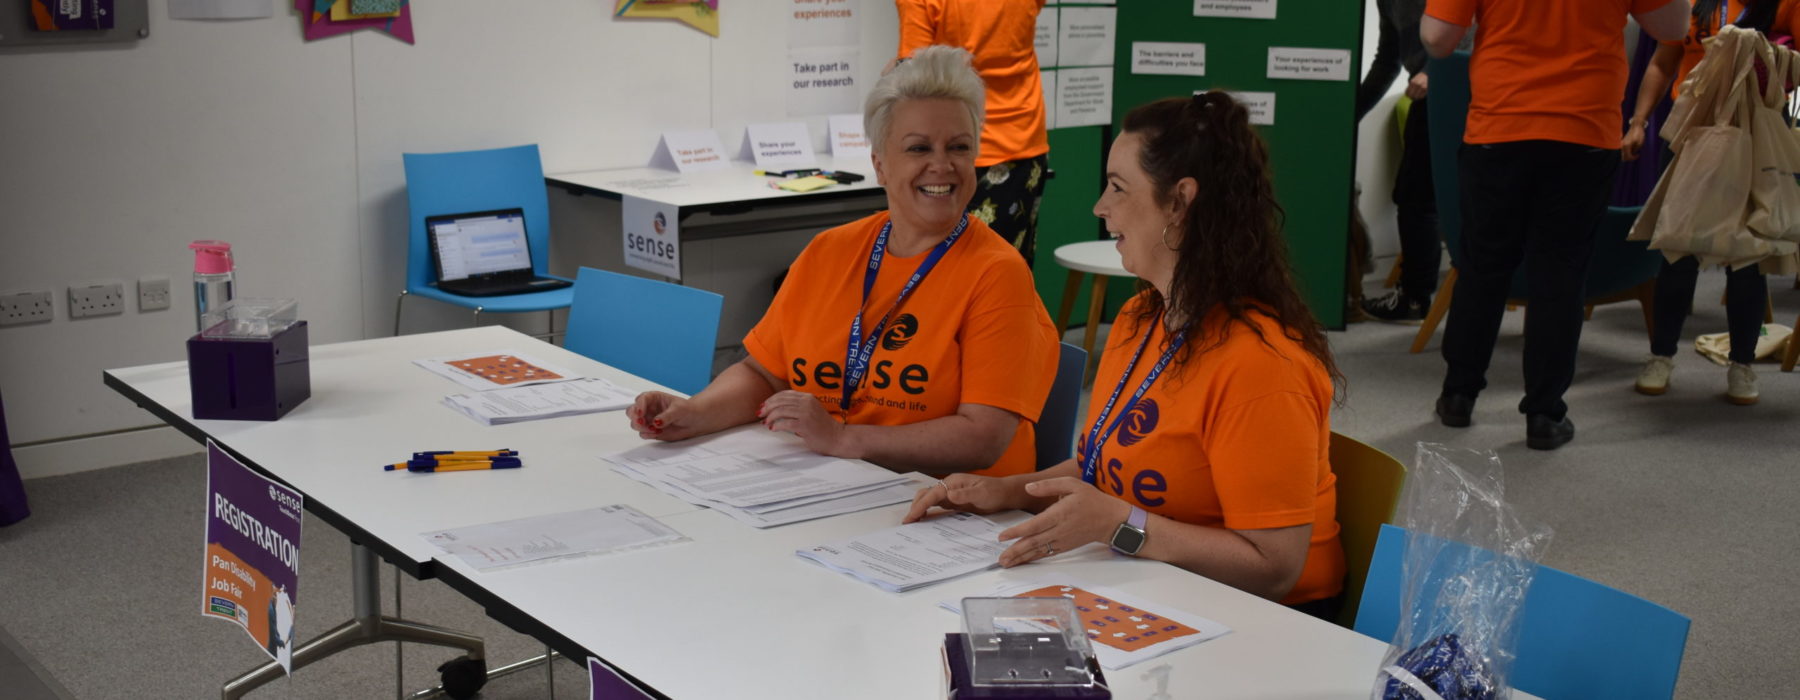 A woman with brown hair and a woman with short blonde hair are sitting at a table wearing bright orange sense t shirts